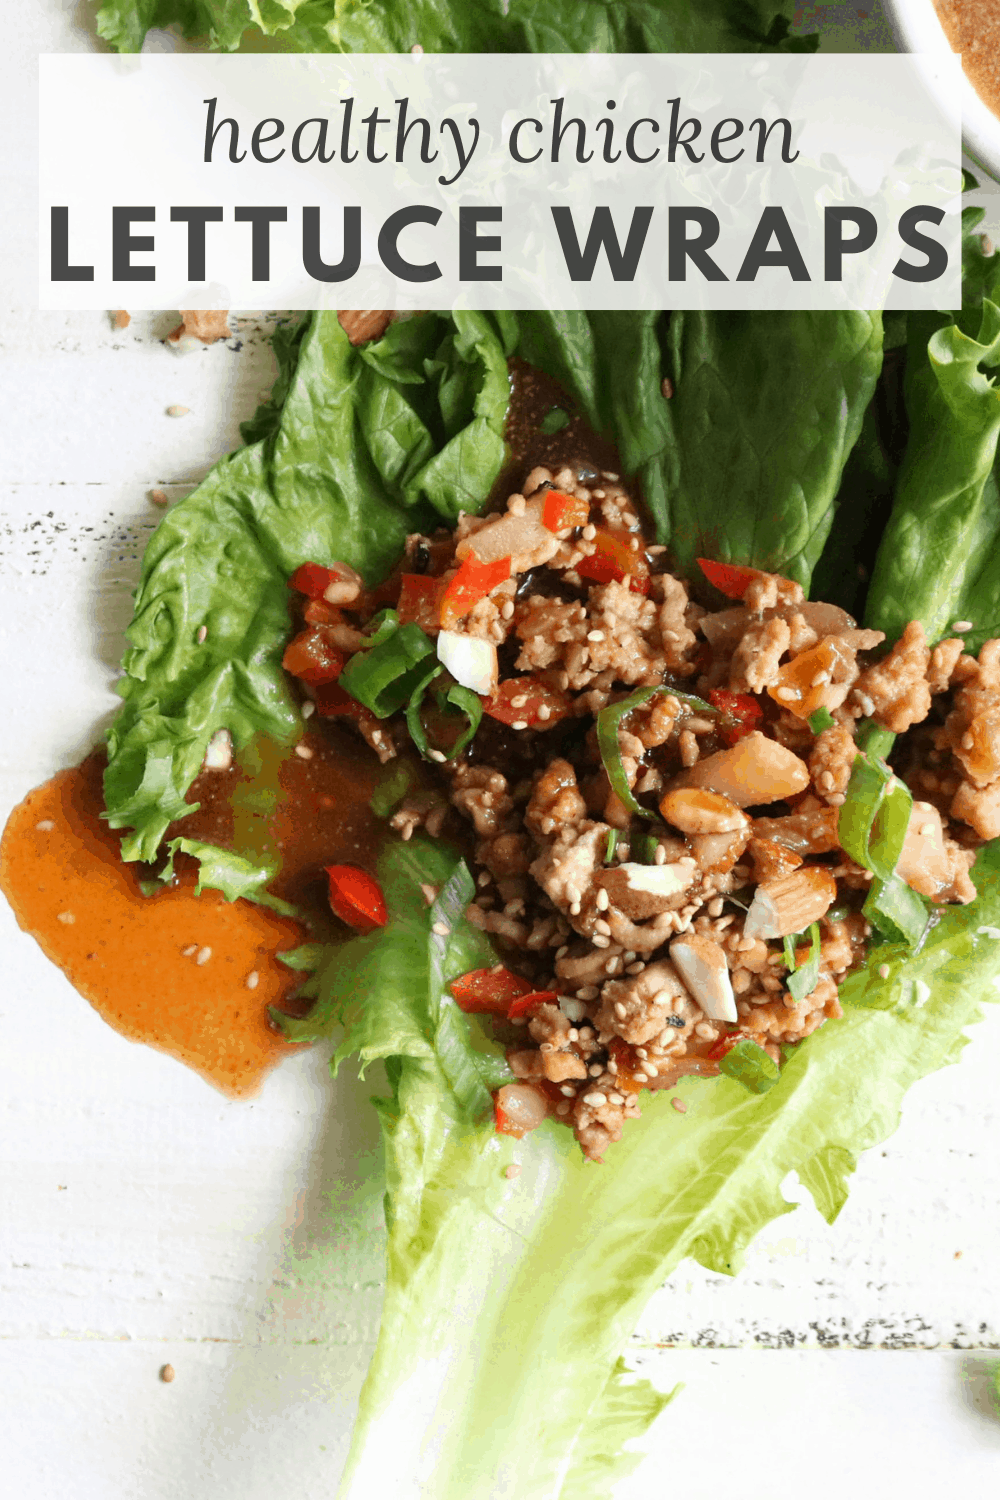 Healthy Chicken Lettuce Wraps - The Toasted Pine Nut